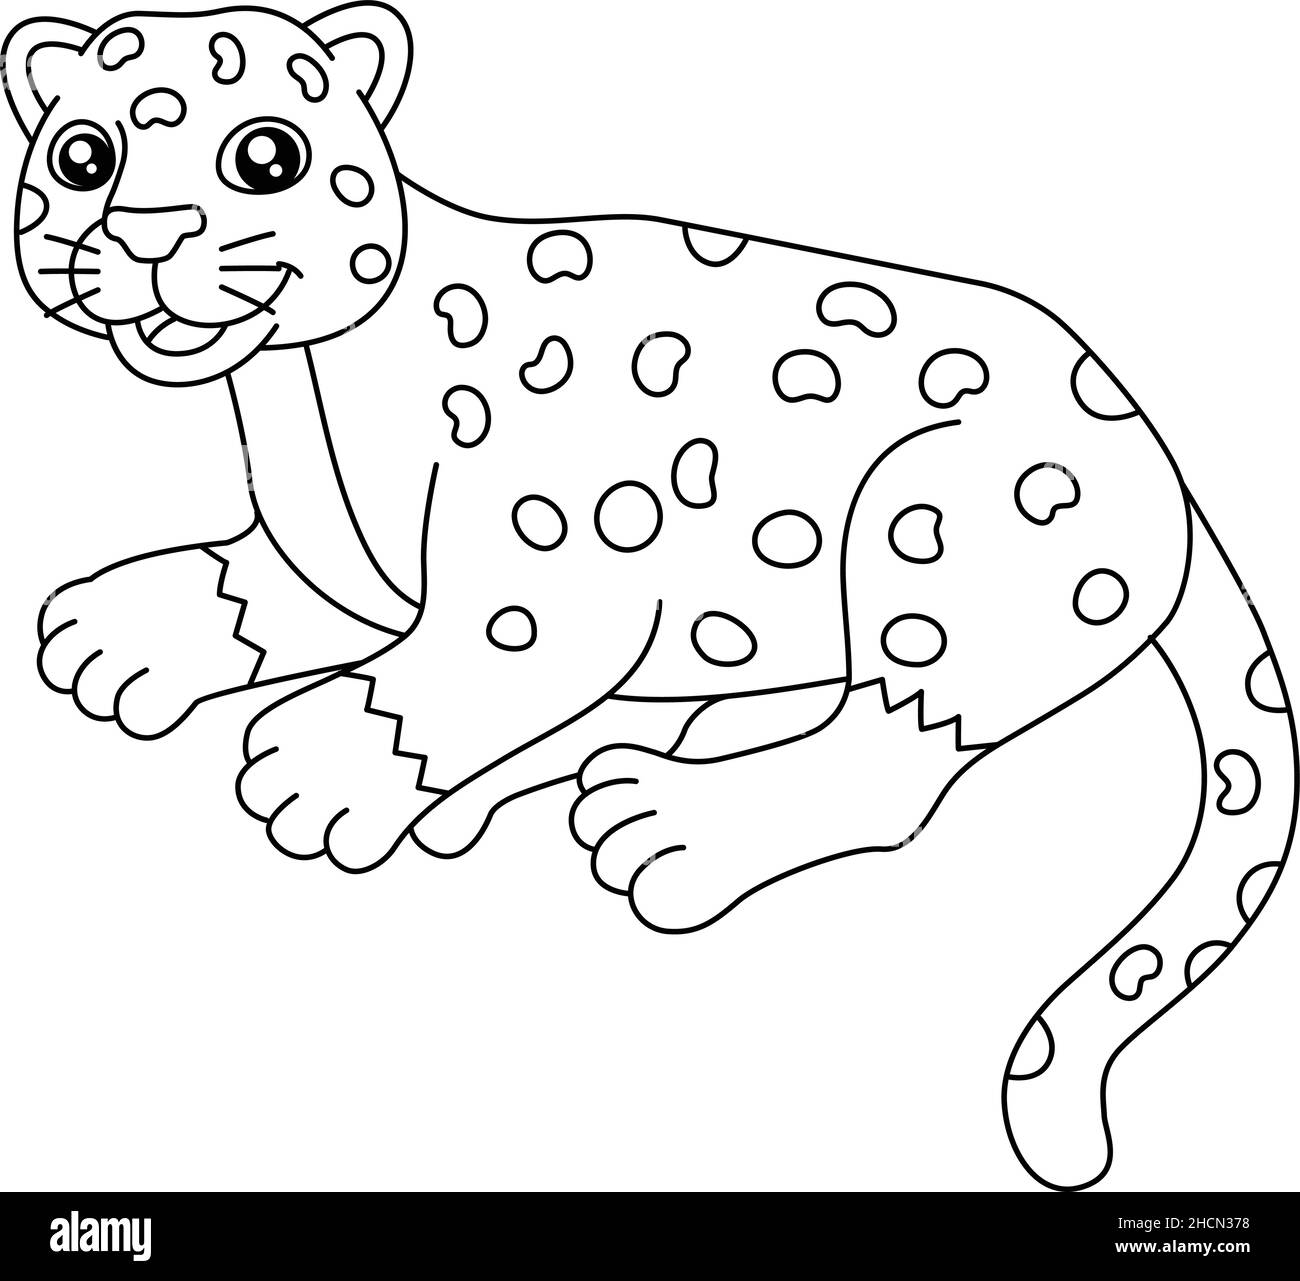 Jaguar coloring page isolated for kids stock vector image art